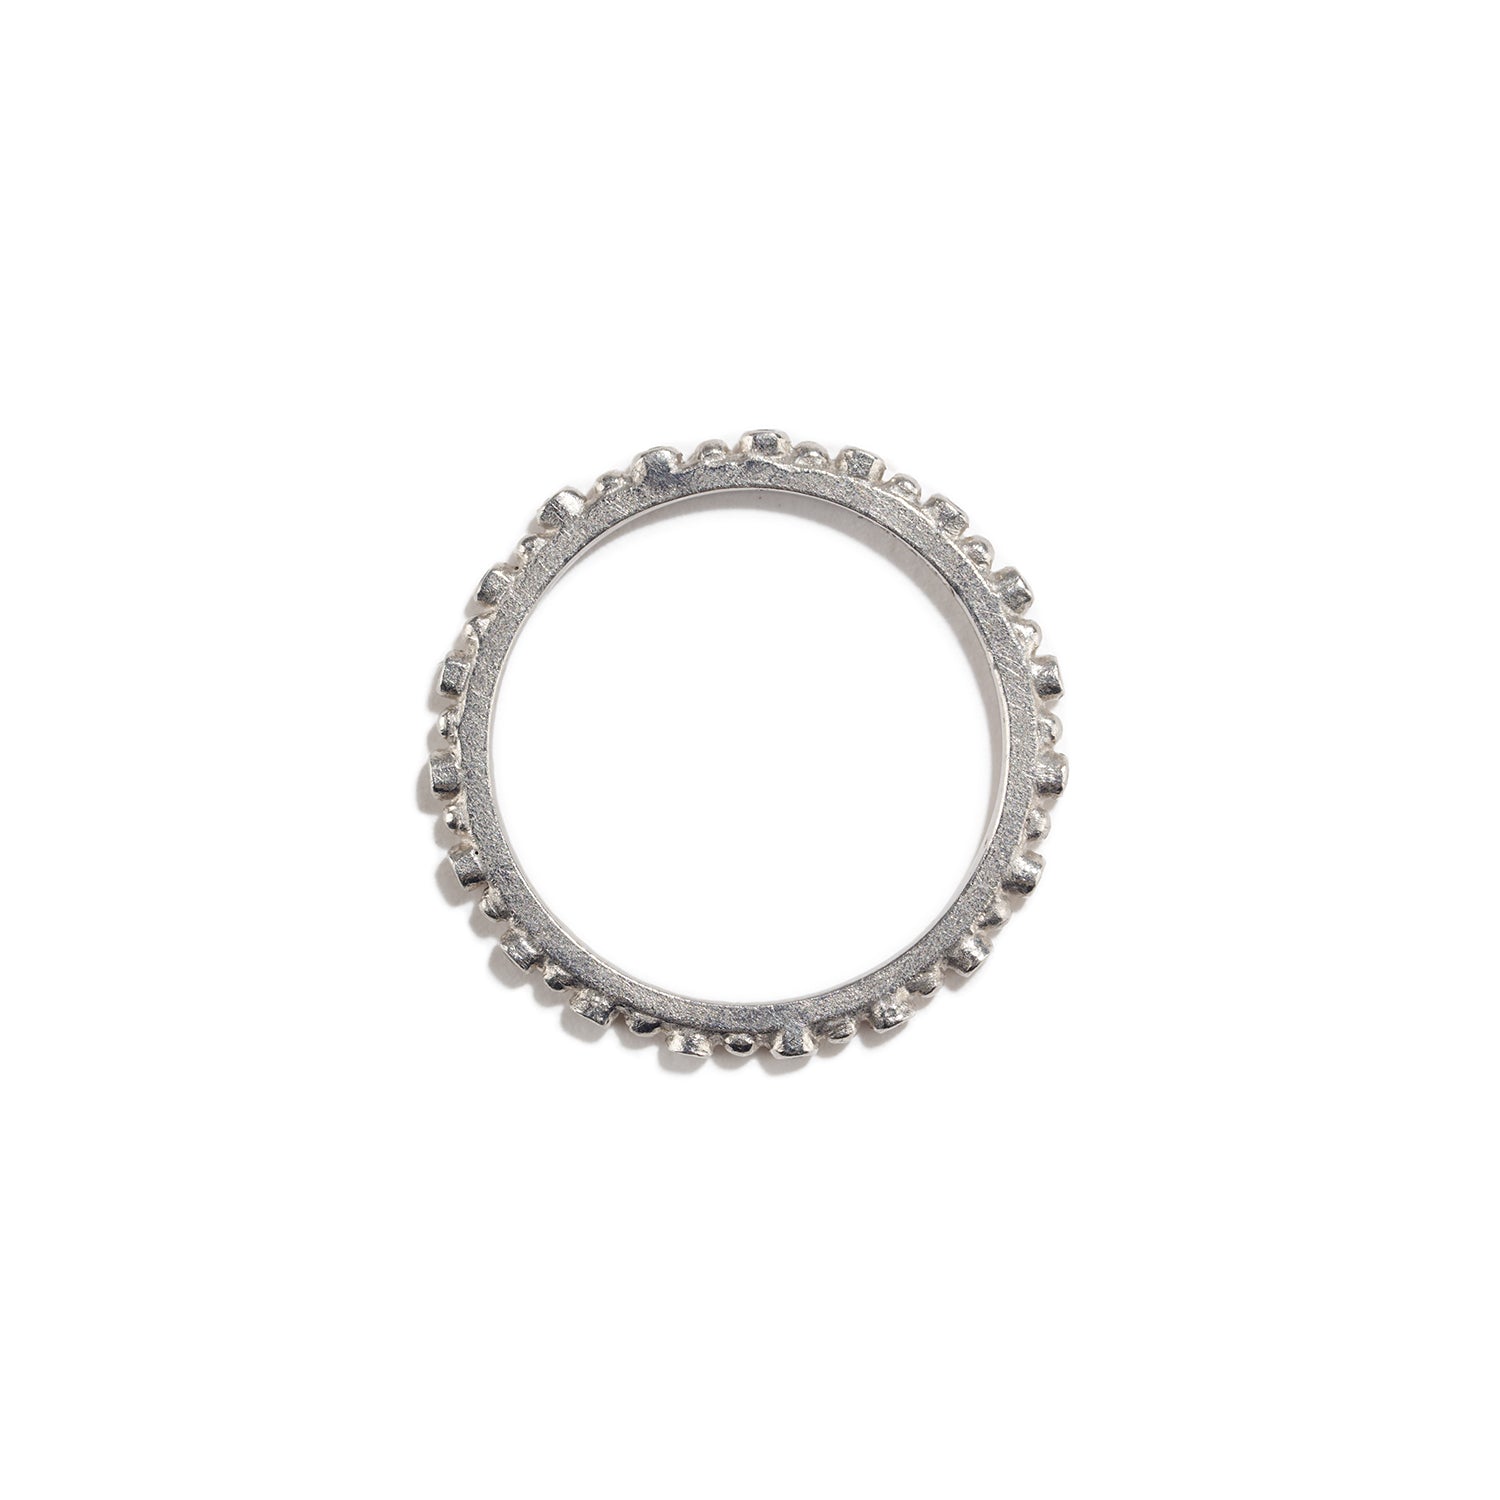 Pins and Needle Stacking Ring